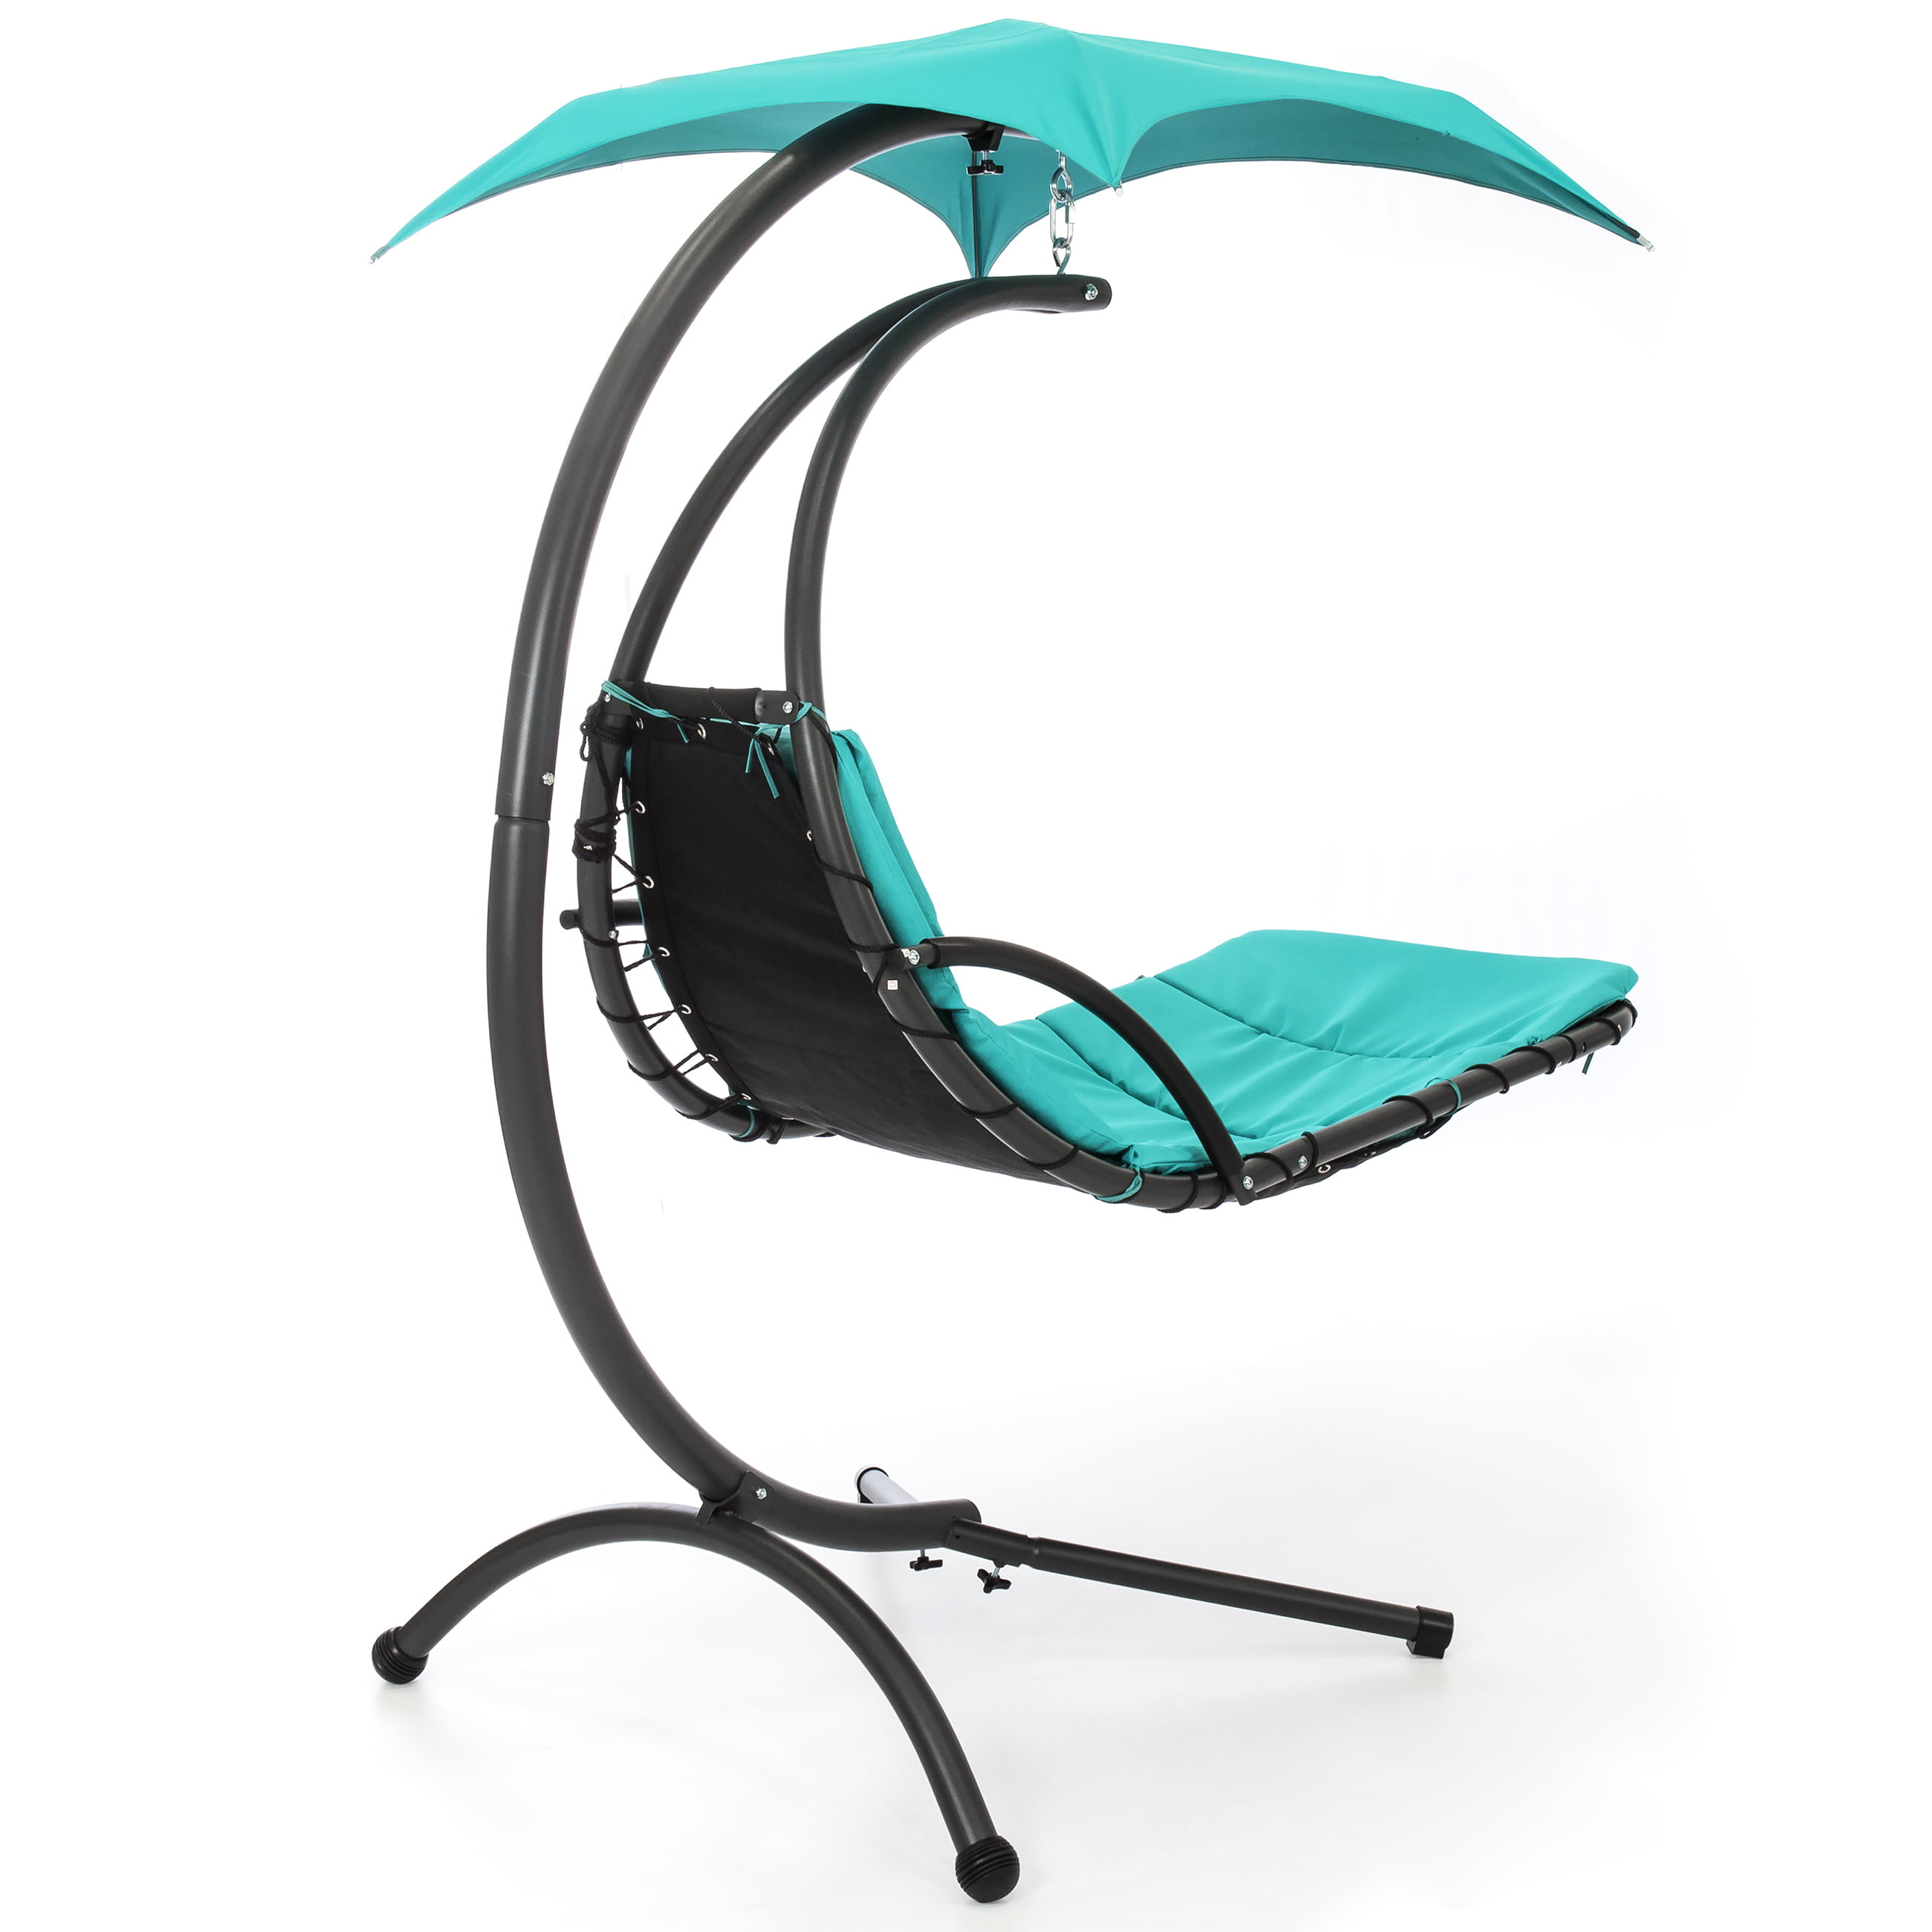 BCP Hanging Chaise Lounger Chair Arc Stand Air Porch Swing Hammock